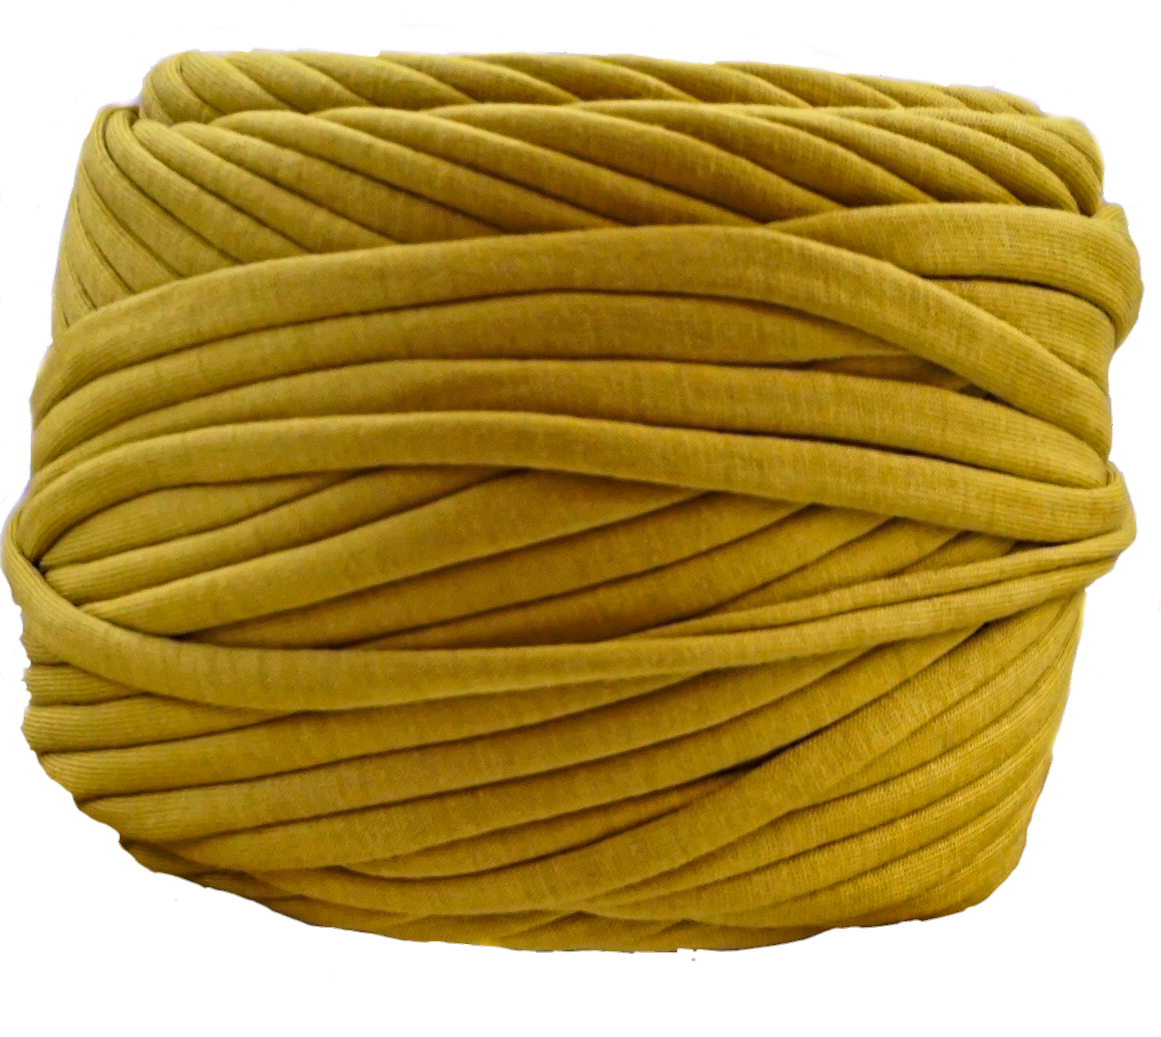 T-shirt yarn for crocheting baskets, bags, rugs and home decor. Honey color